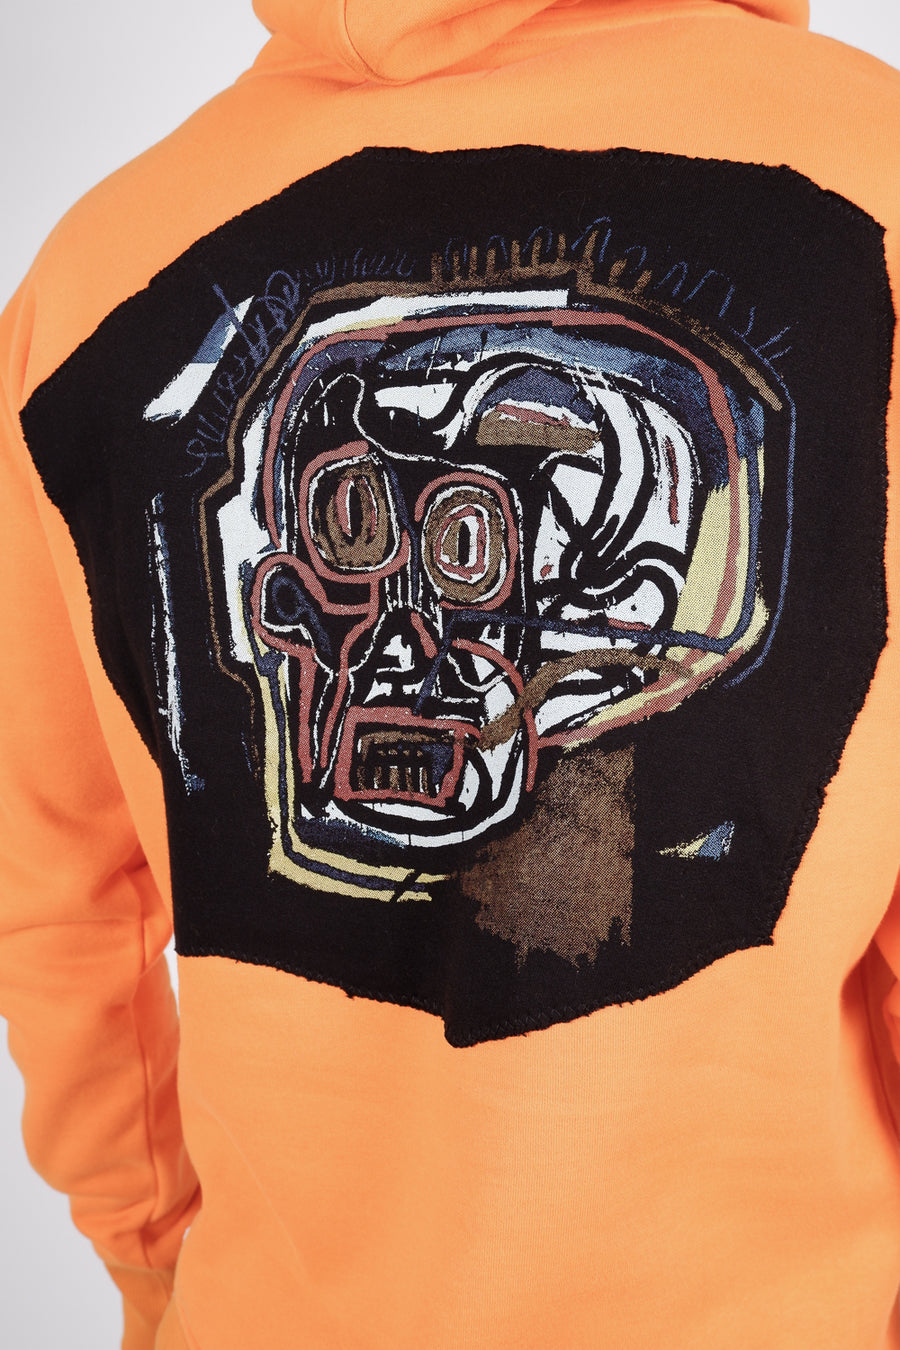 Buy the ABE Basquiat Love Saves Hoodie Orange at Intro. Spend £50 for free UK delivery. Official stockists. We ship worldwide.